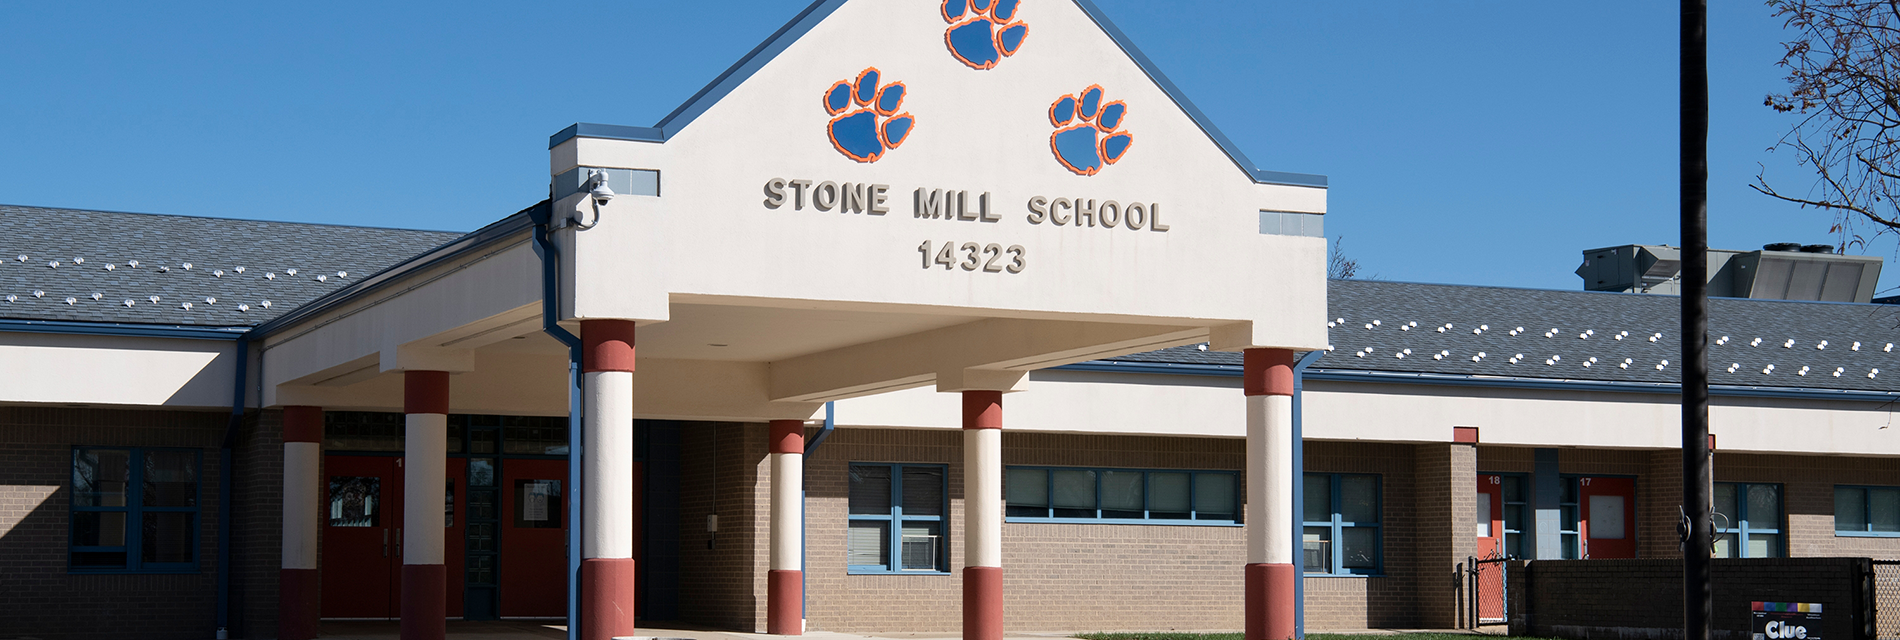 Stone mill Banner.png